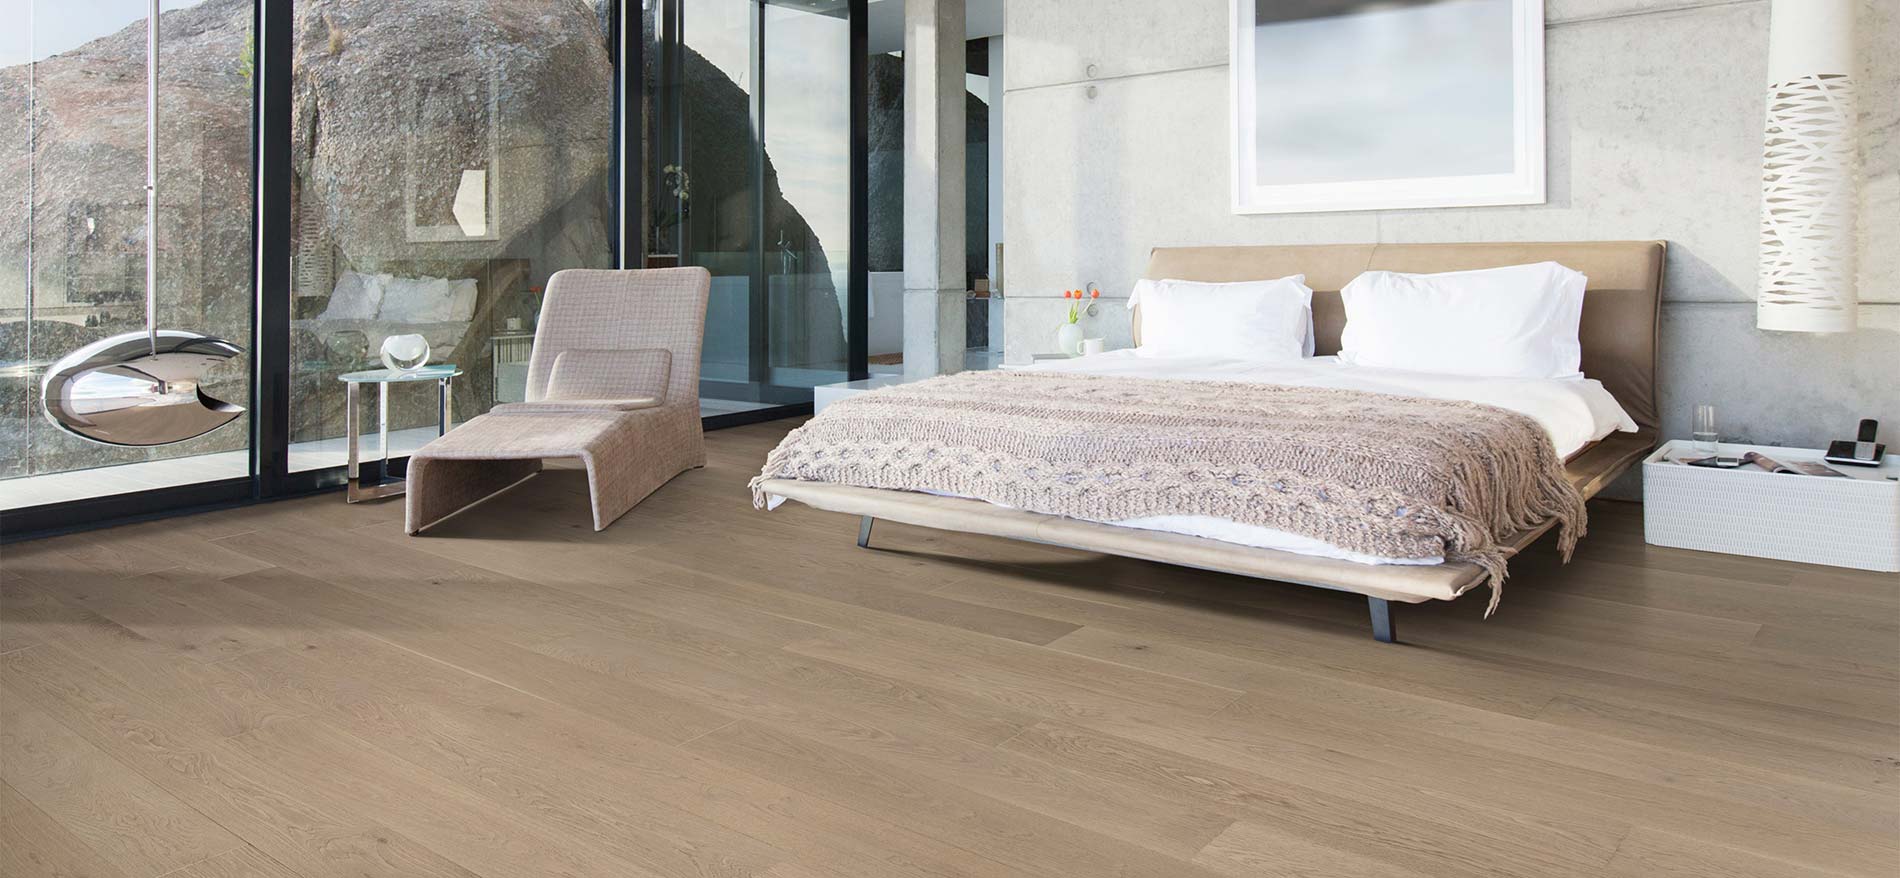 Provence wood flooring by Craft